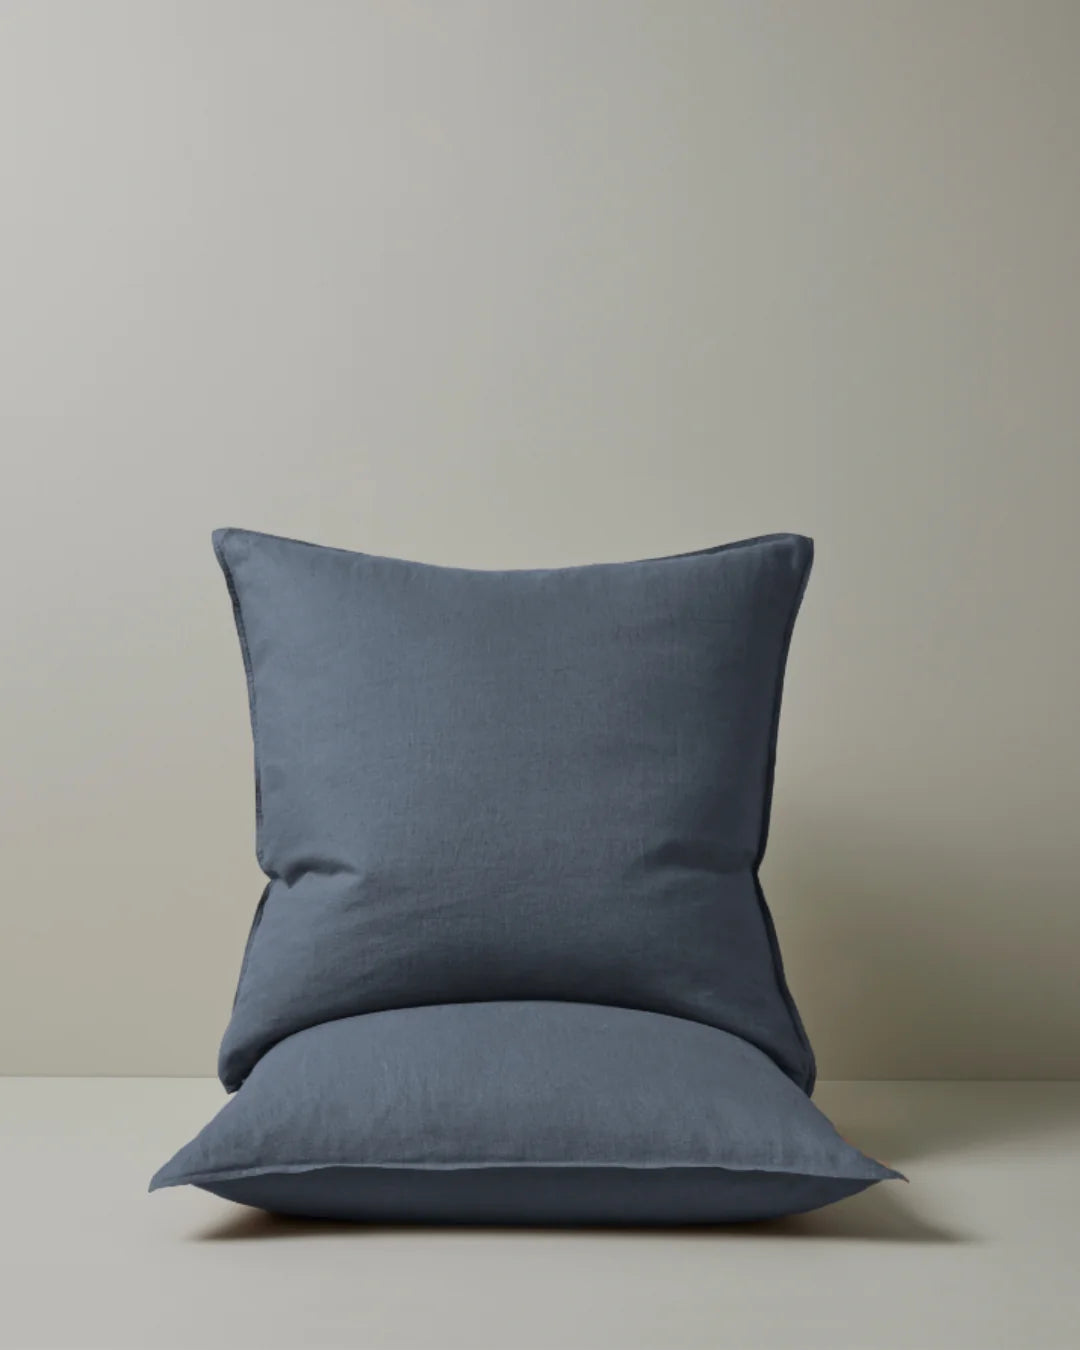 Crafted from the highest quality French Flax Linen, each product from the Ravello range is prewashed and aero finished for a unique and luxuriously soft, relaxed feel, making it a dream to rest and relax on.  The Denim colourway is a soft denim blue that will bring a sense of calm to your bedroom and sit beautifully in any cool, neutral or coastal setting.